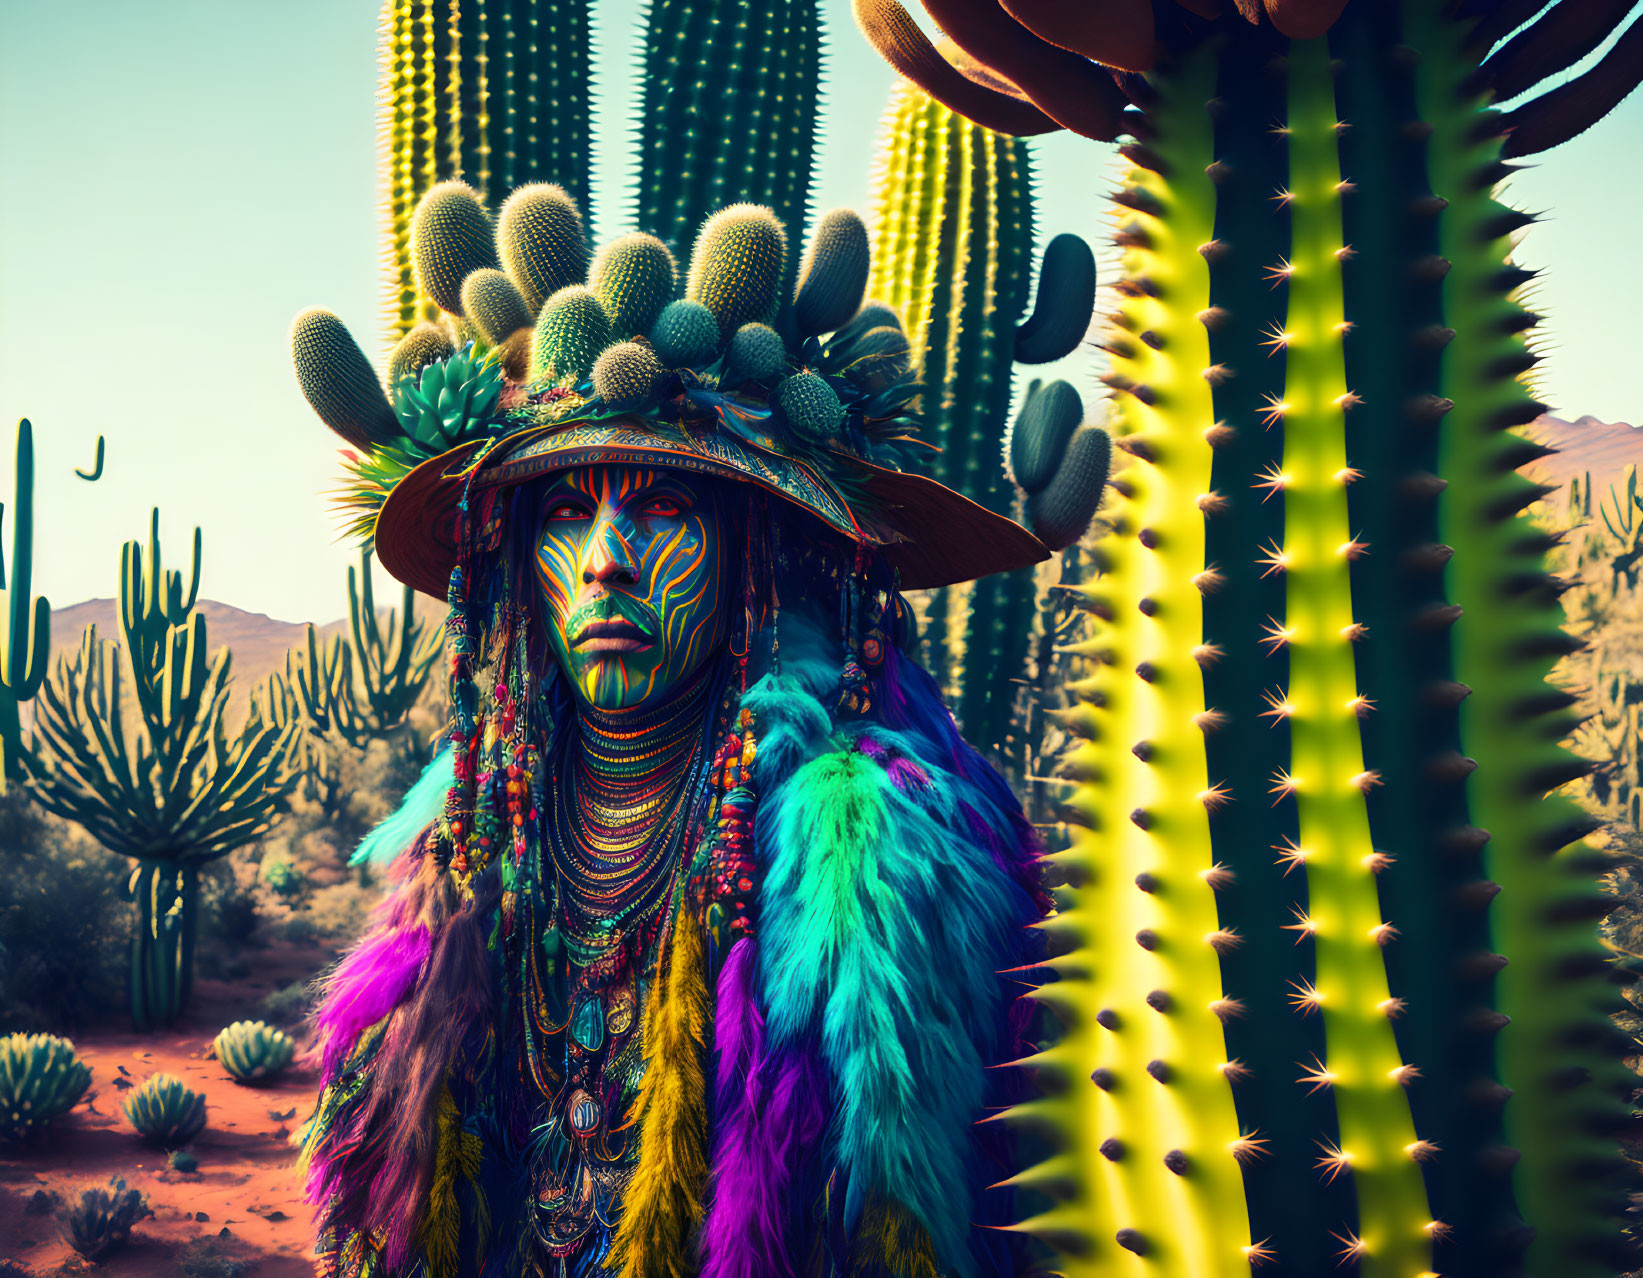 Person with Vibrant Tribal Makeup and Feathered Headdress in Desert Scene